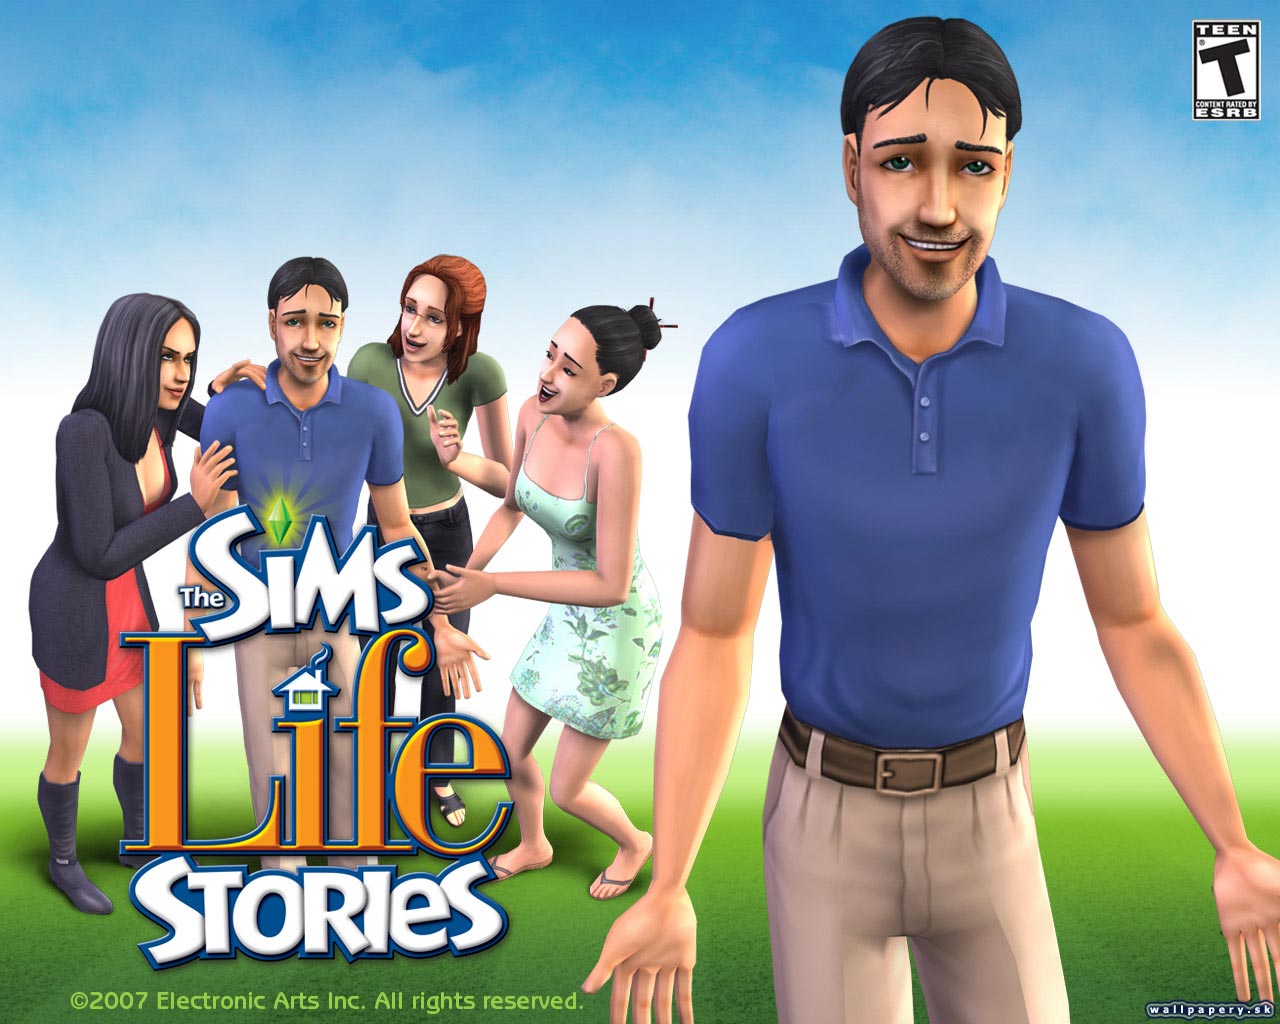 The Sims Life Stories - wallpaper 8